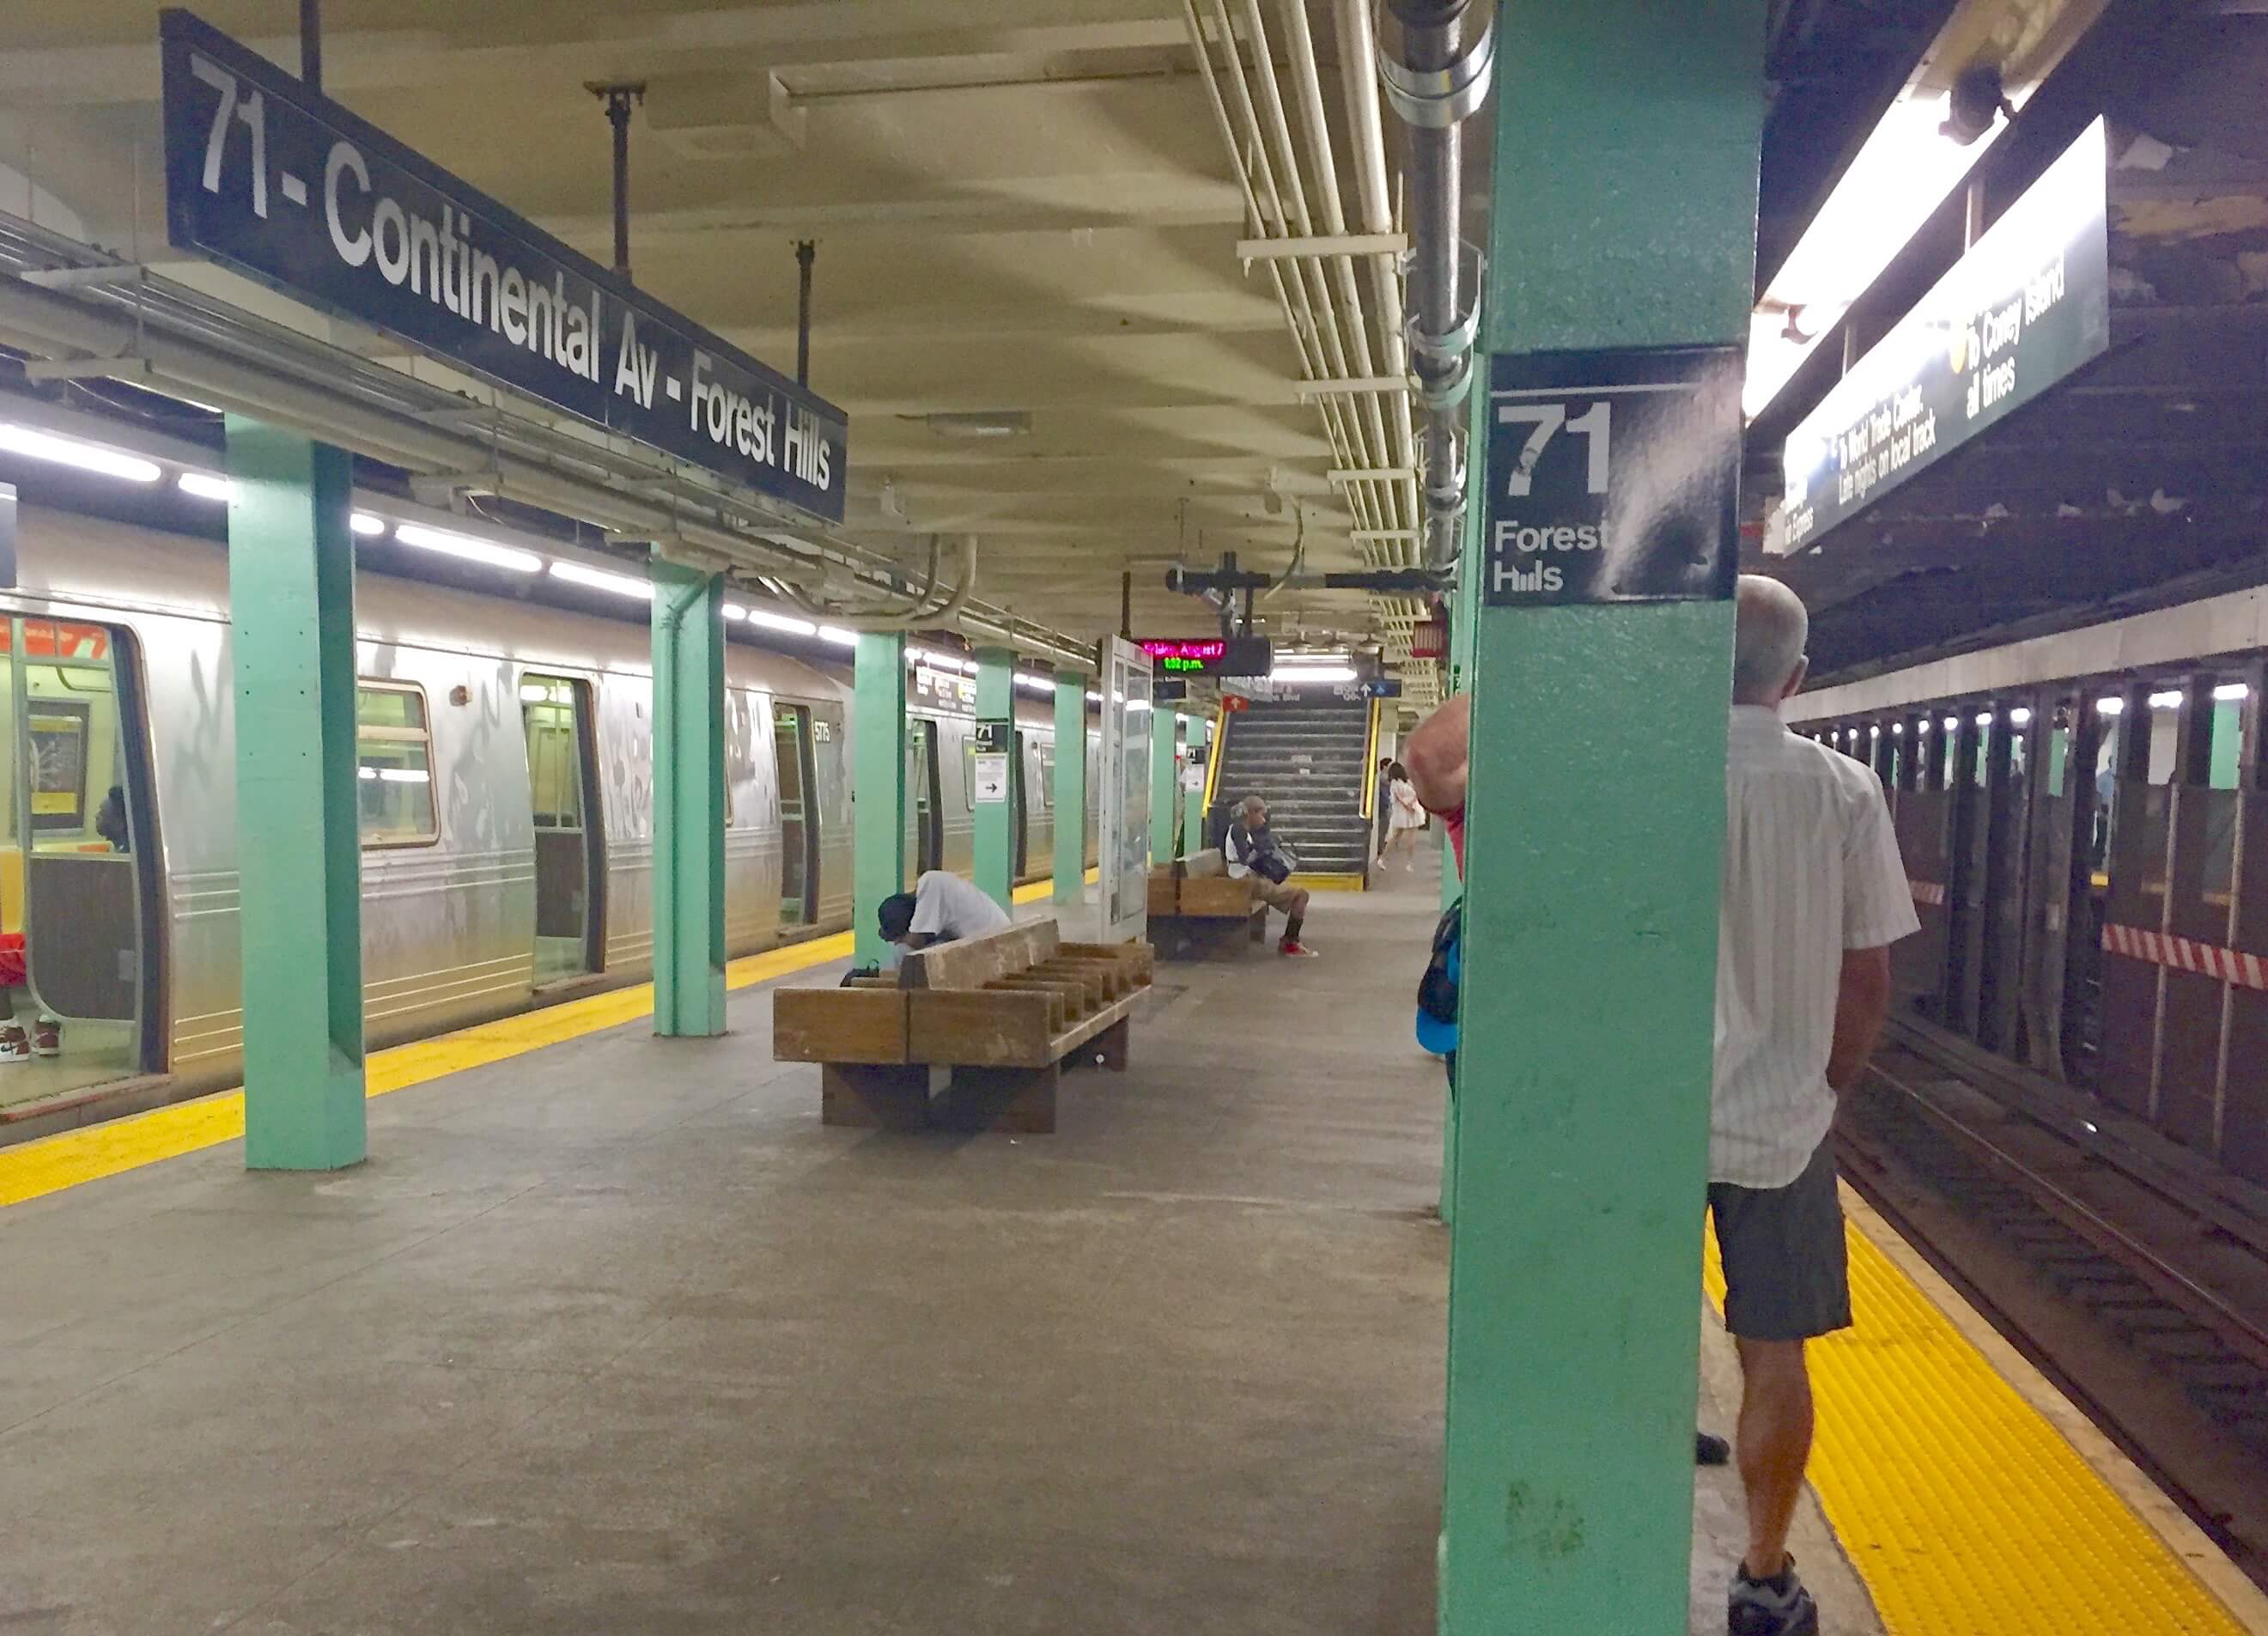 A platform at the 71-Continental Avenues subway station in Forest Hills